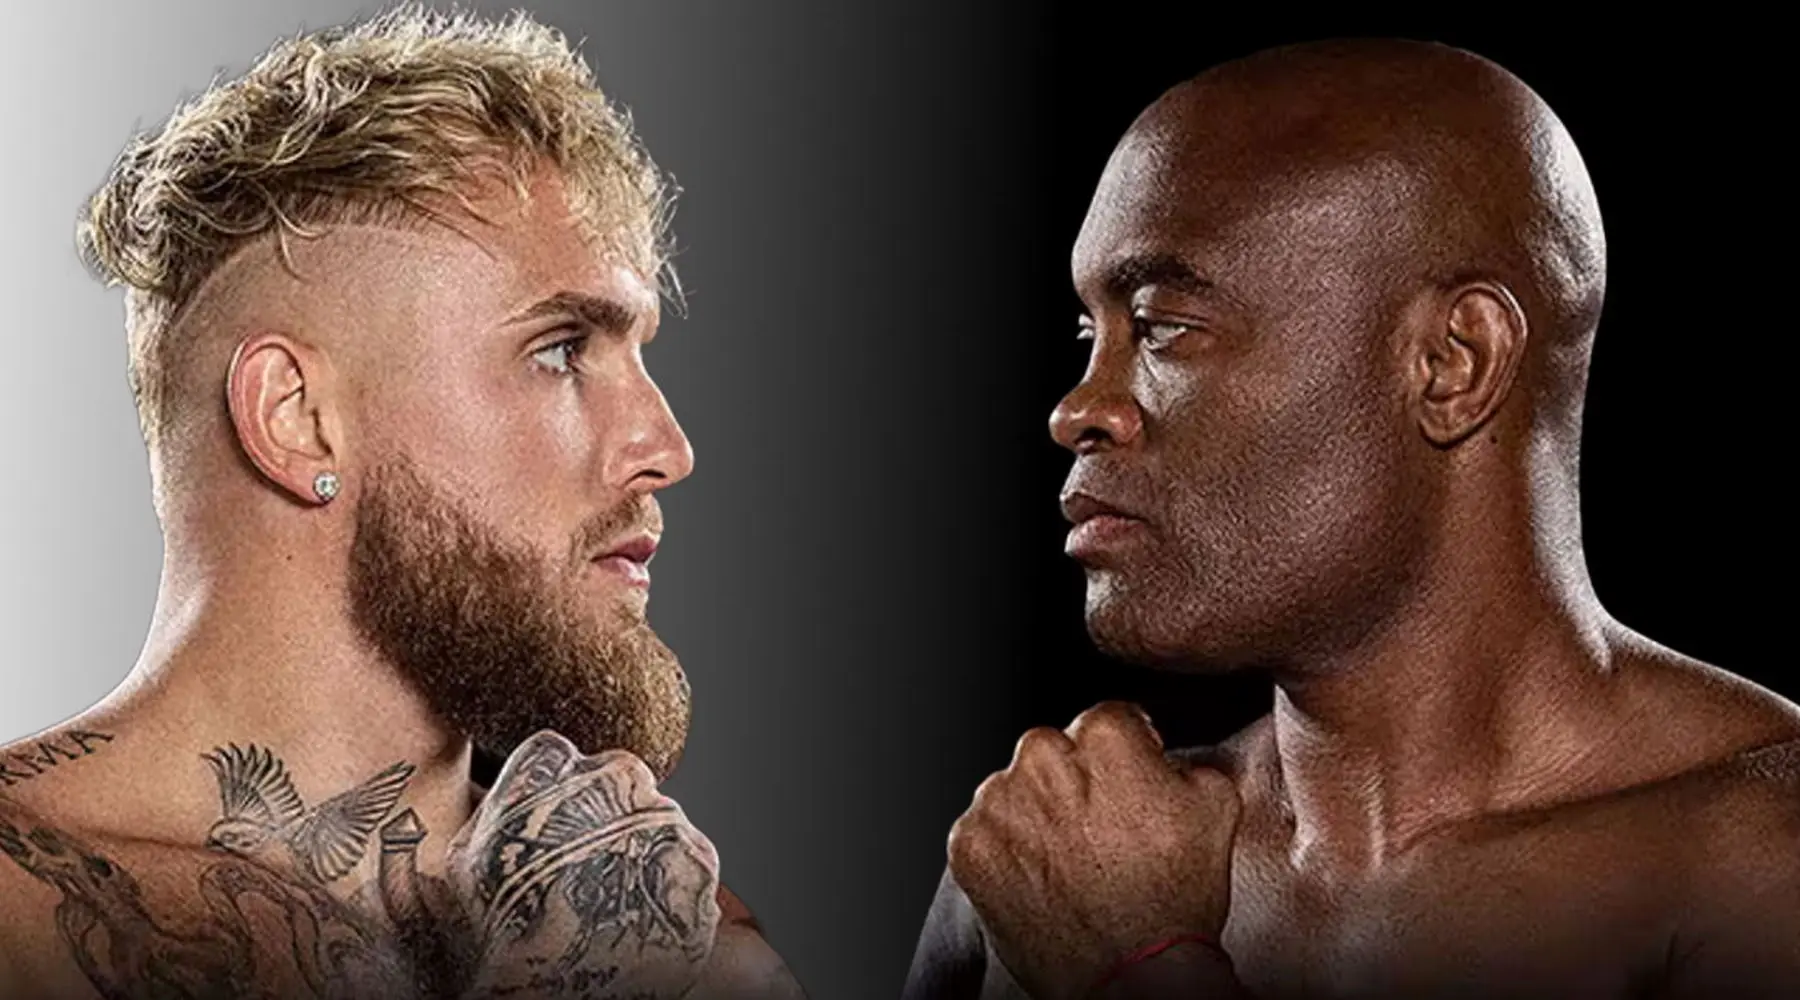 How to watch Jake Paul vs Anderson Silva boxing live online